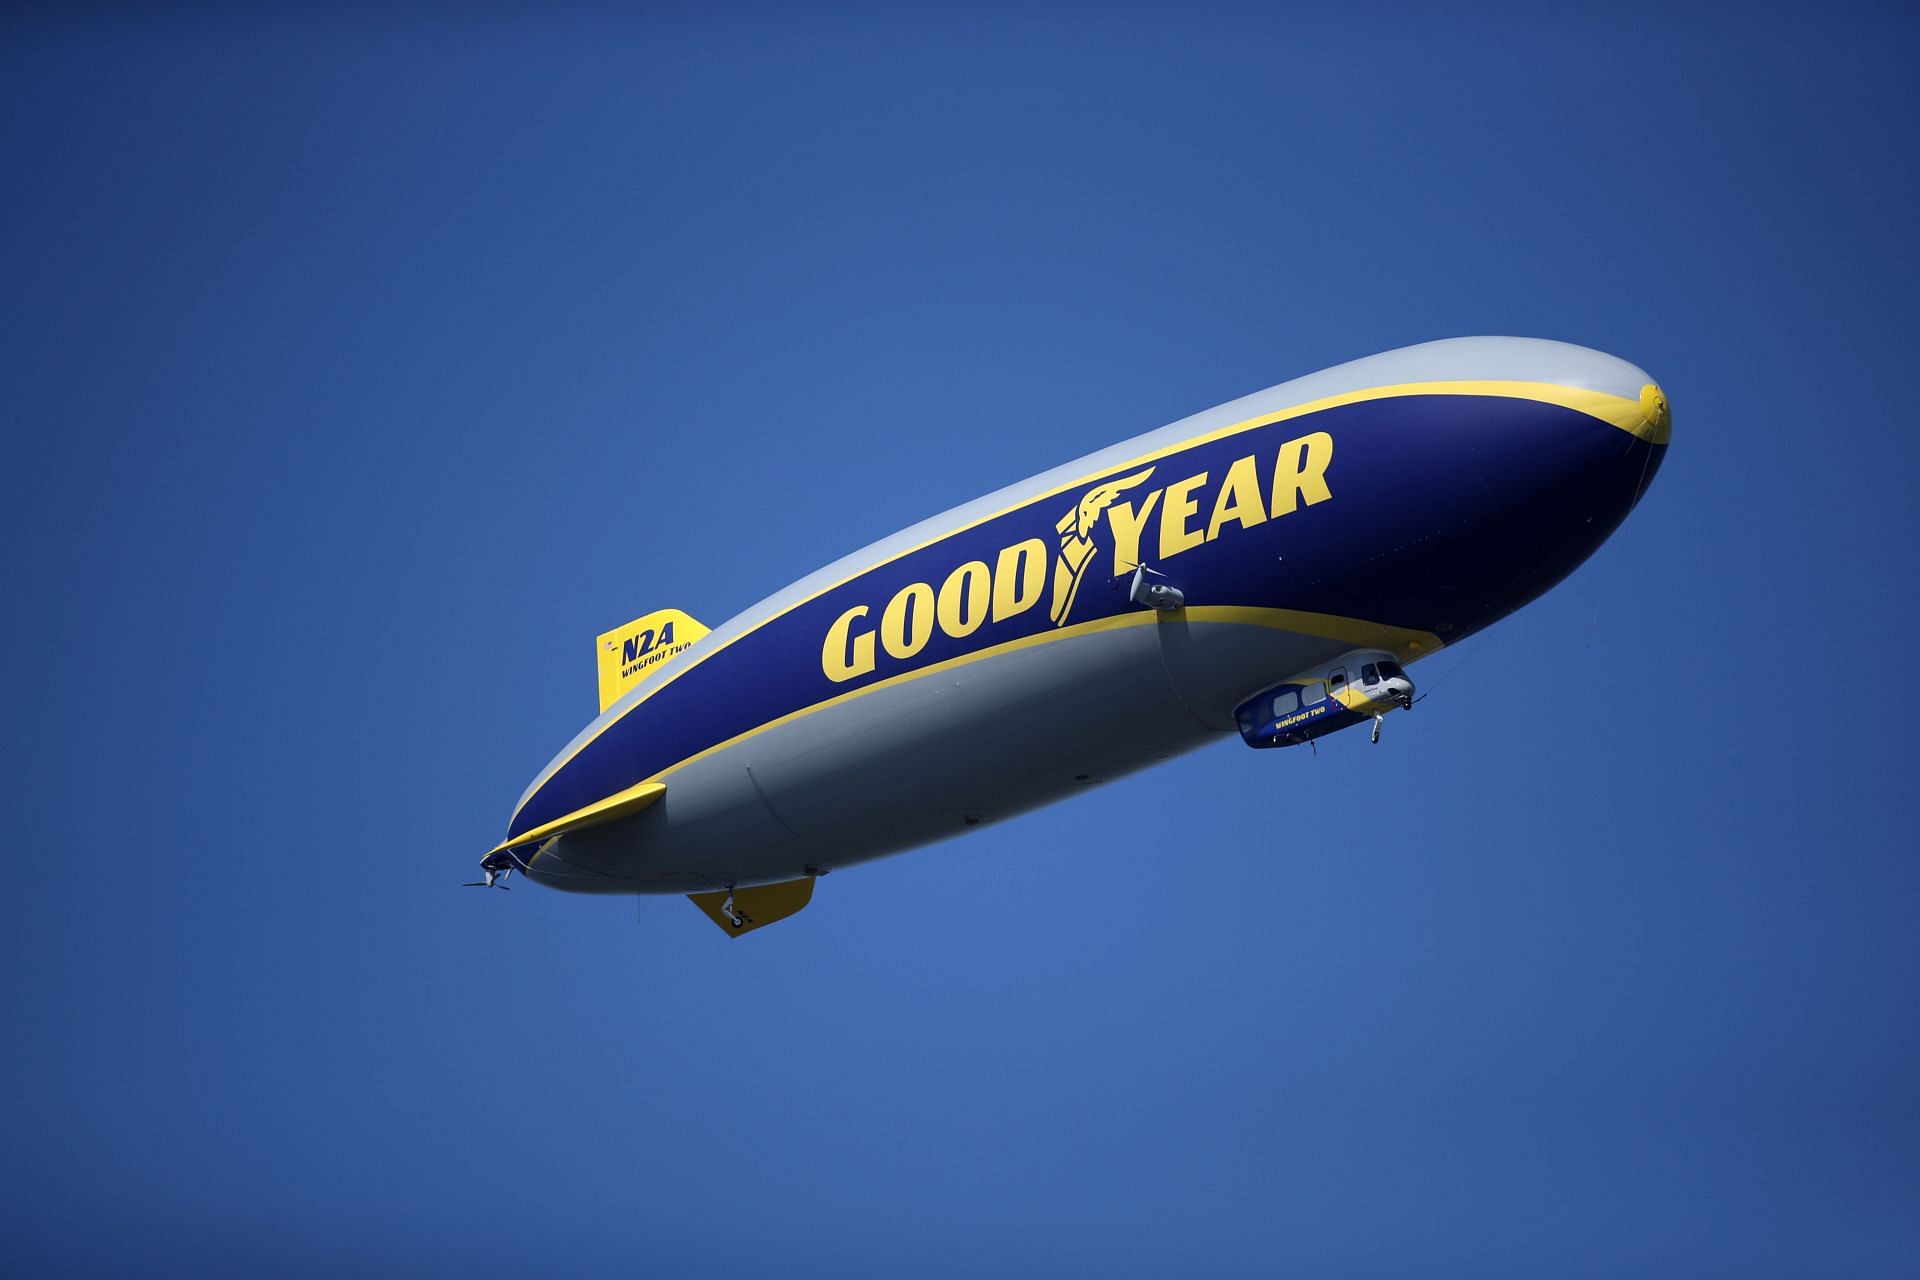 The Goodyear blimp flies overhead during the NASCAR Cup Series Goodyear 400 at Darlington Raceway (Photo by Sean Gardner/Getty Images)